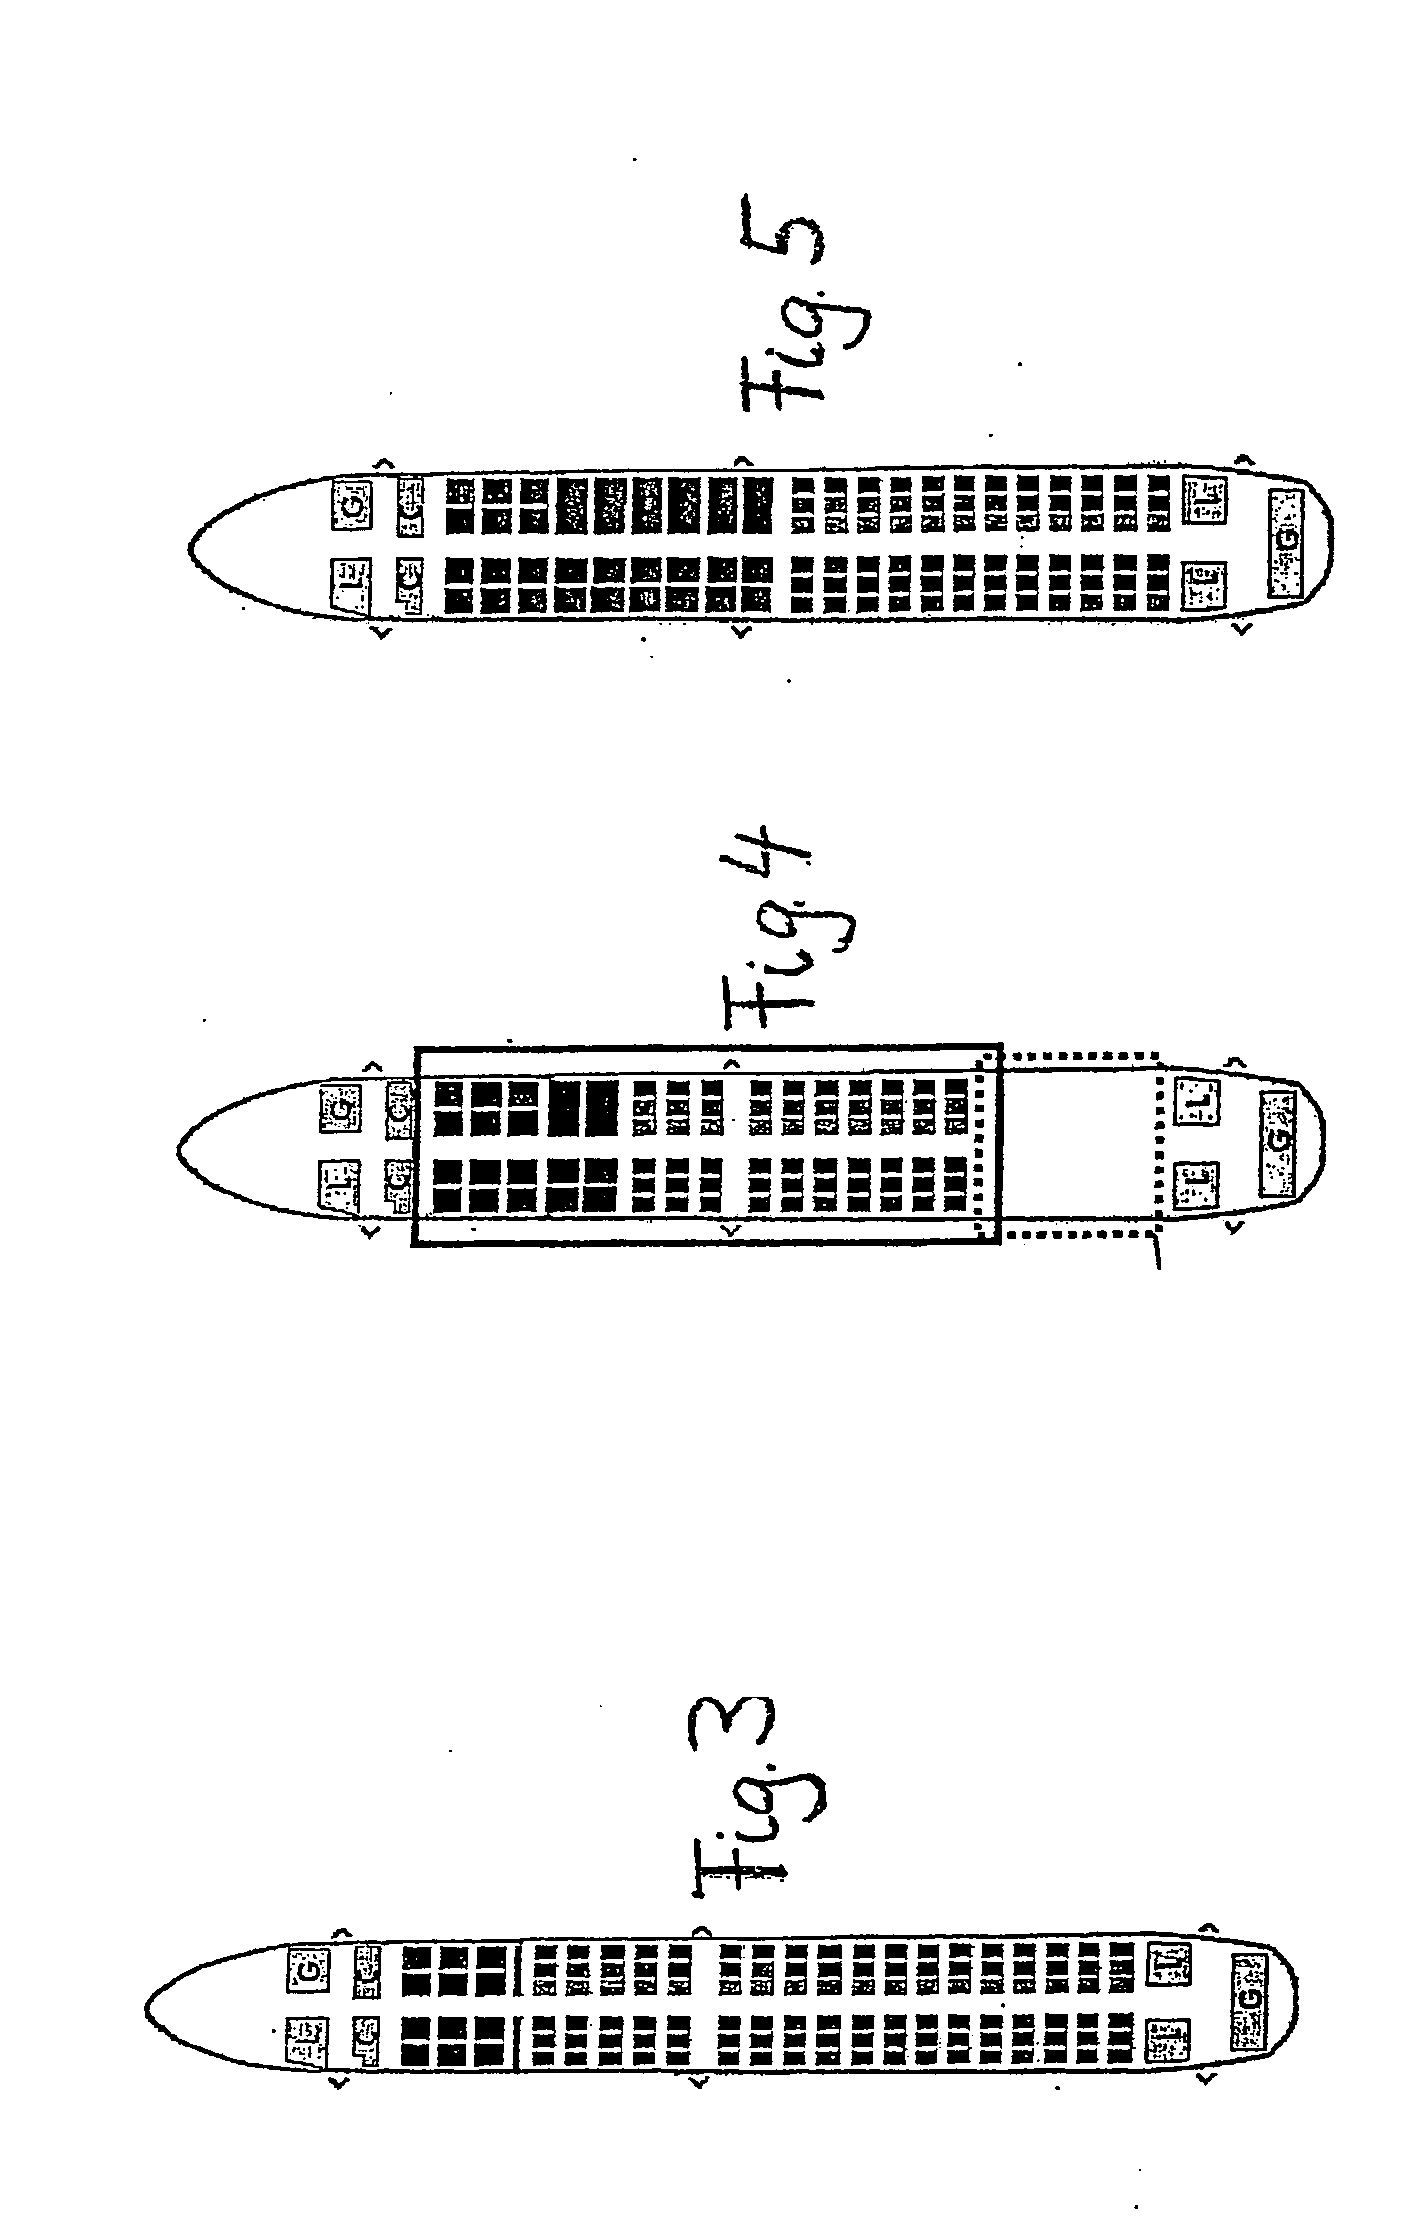 Method and device for adapting the seat row arrangement in passenger planes according to need